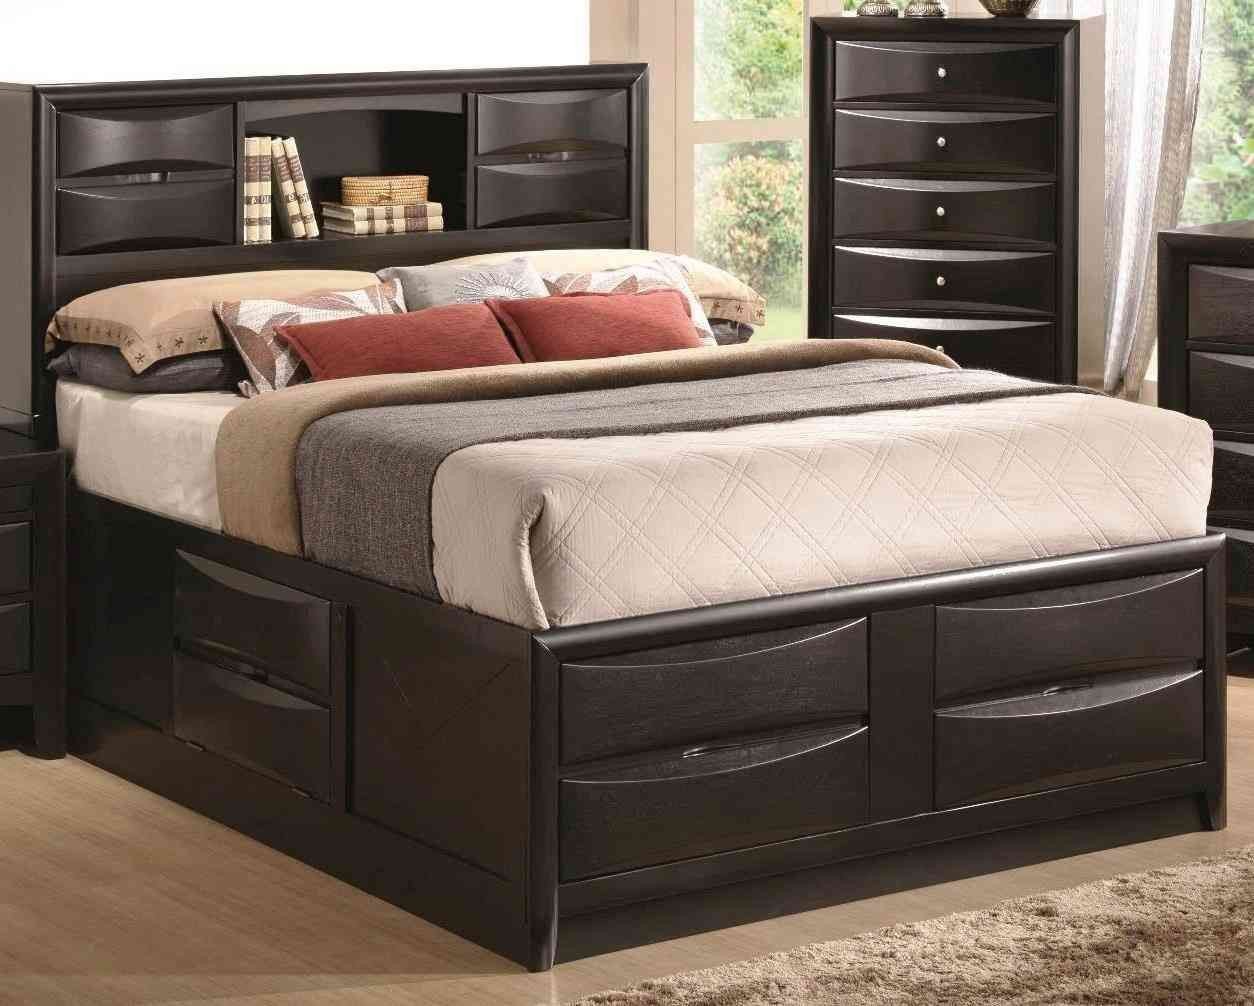 20 Awesome Big Lots Bedroom Furniture | Findzhome